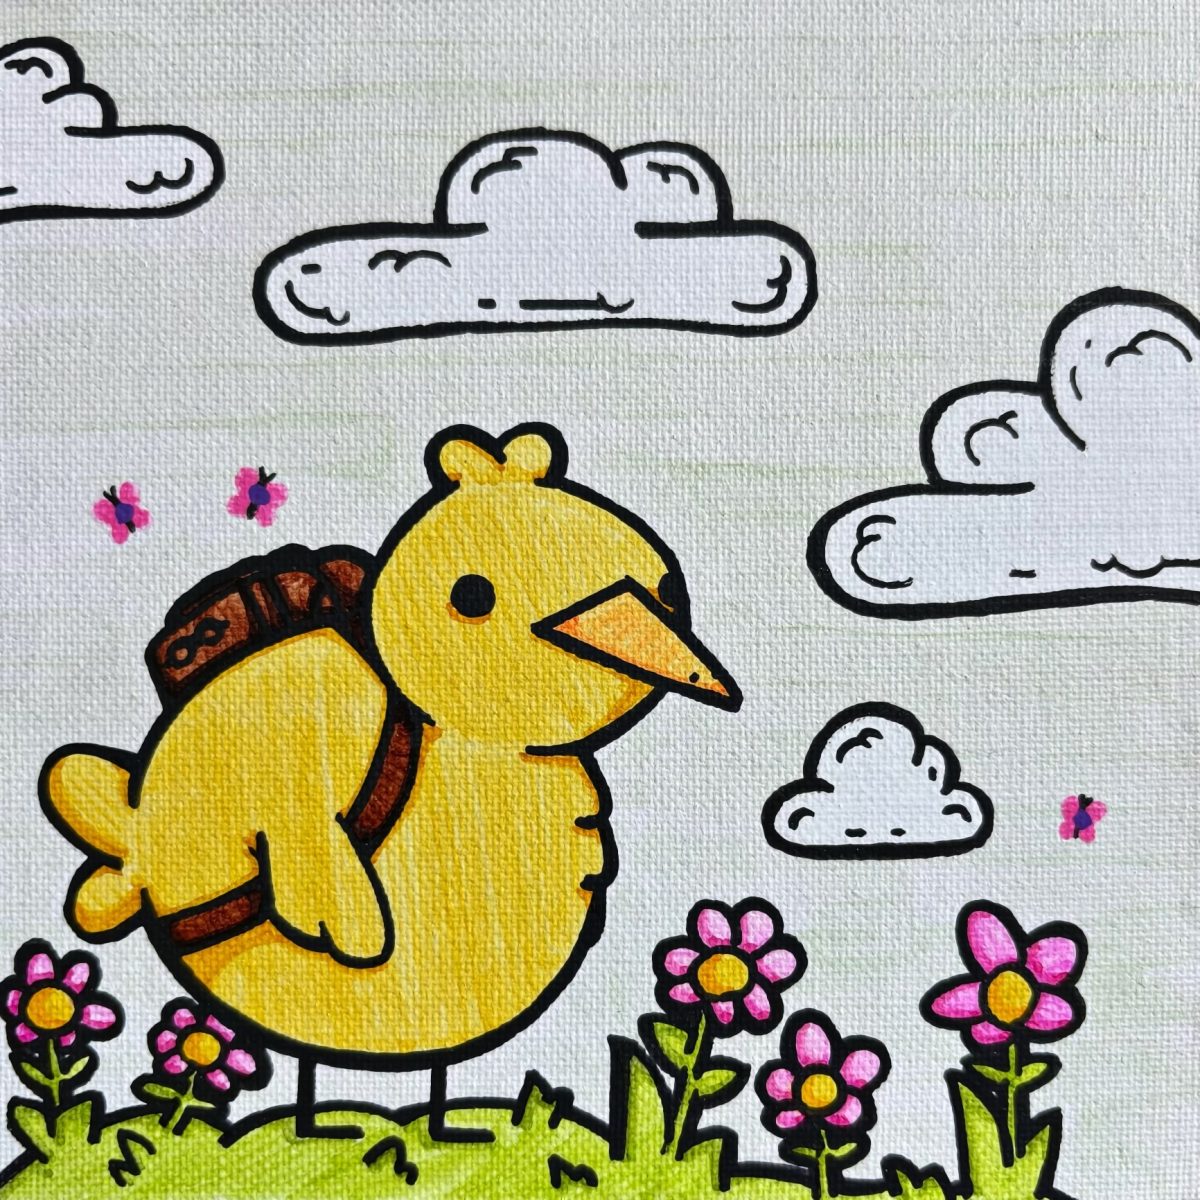 A+spring+chicken+sports+a+backpack+as+it+treks+among+pink+flowers+and+fluttering+butterflies.+A+baby+chicken+is+ready+for+adventure+as+summer+approaches.+%28Aidan+Renteria+%7C+Northern+Star%29